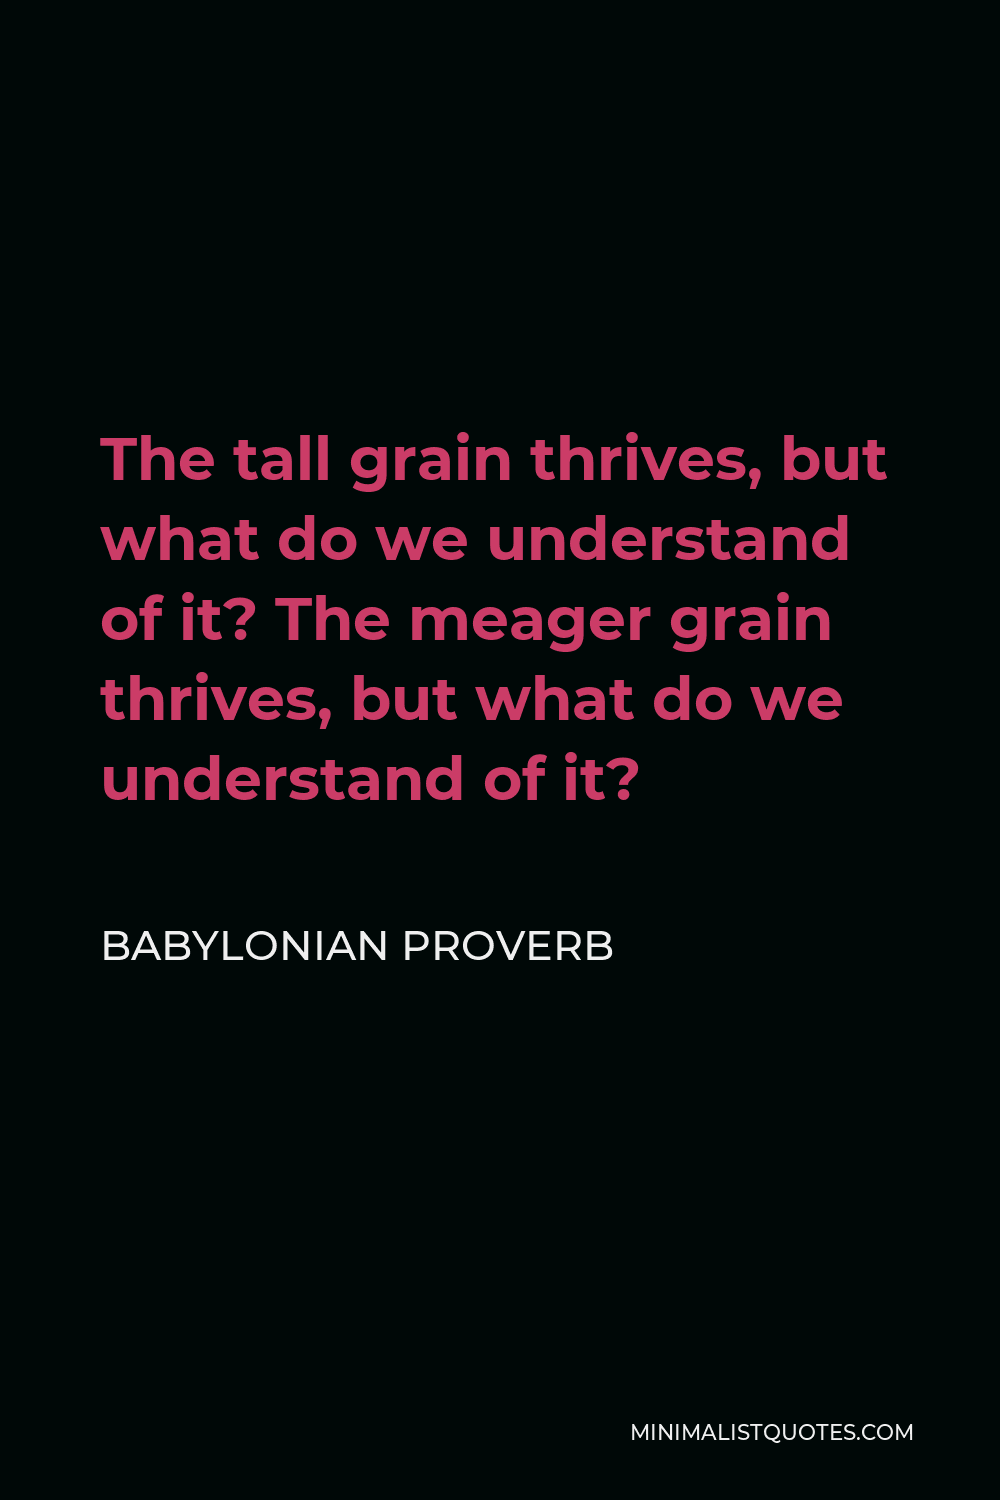 Babylonian Proverb Quote - The tall grain thrives, but what do we understand of it? The meager grain thrives, but what do we understand of it?